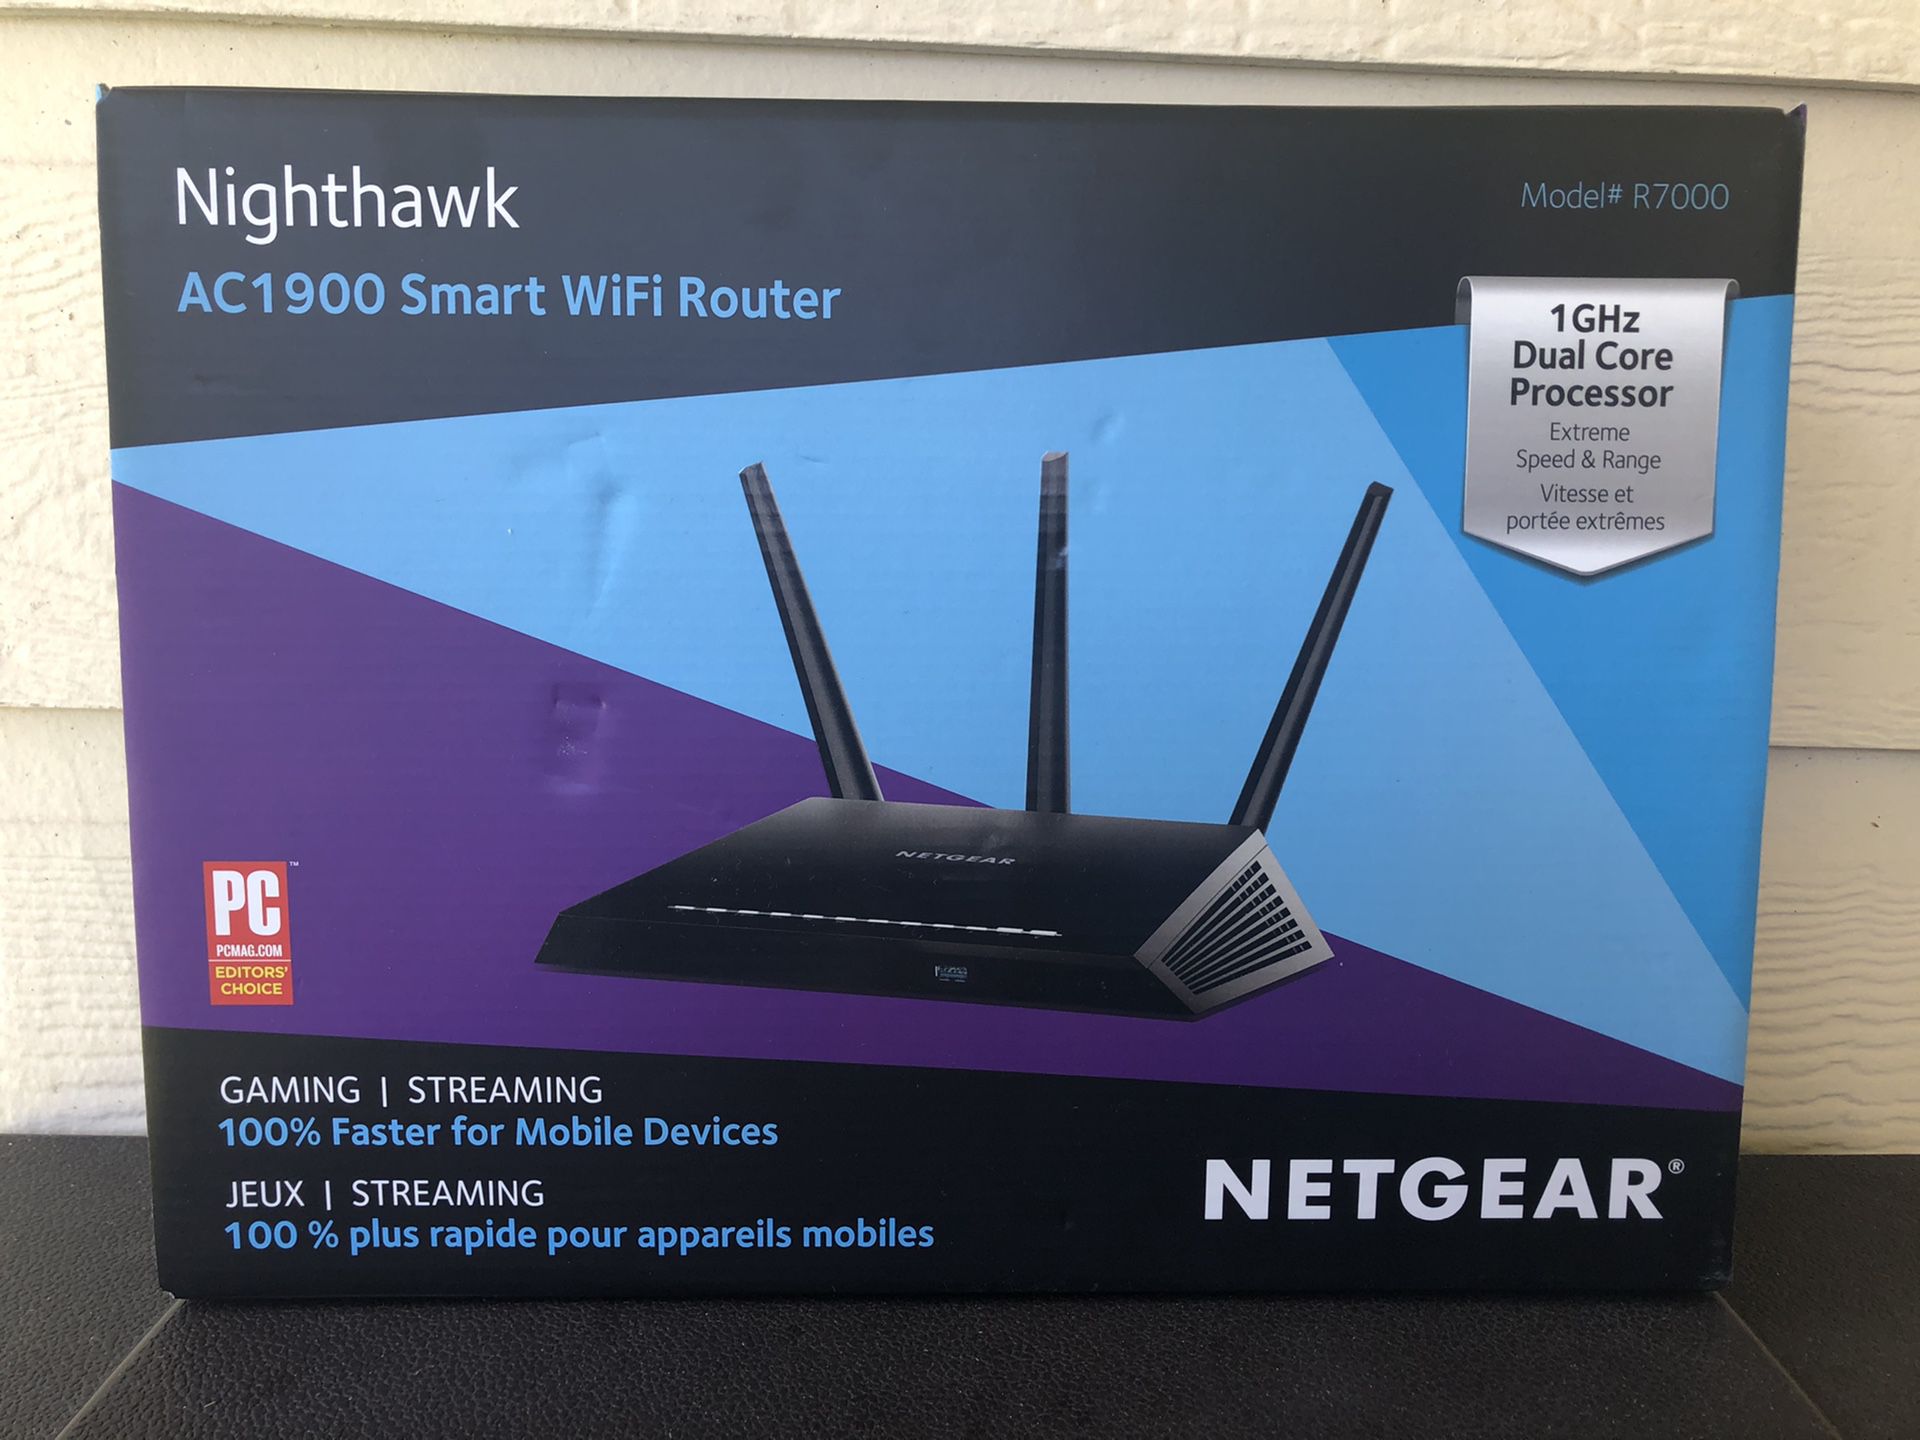 Nighthawk AC 1900 Smart WiFi Router INCLUDES the Box!! $40!! From Netgear